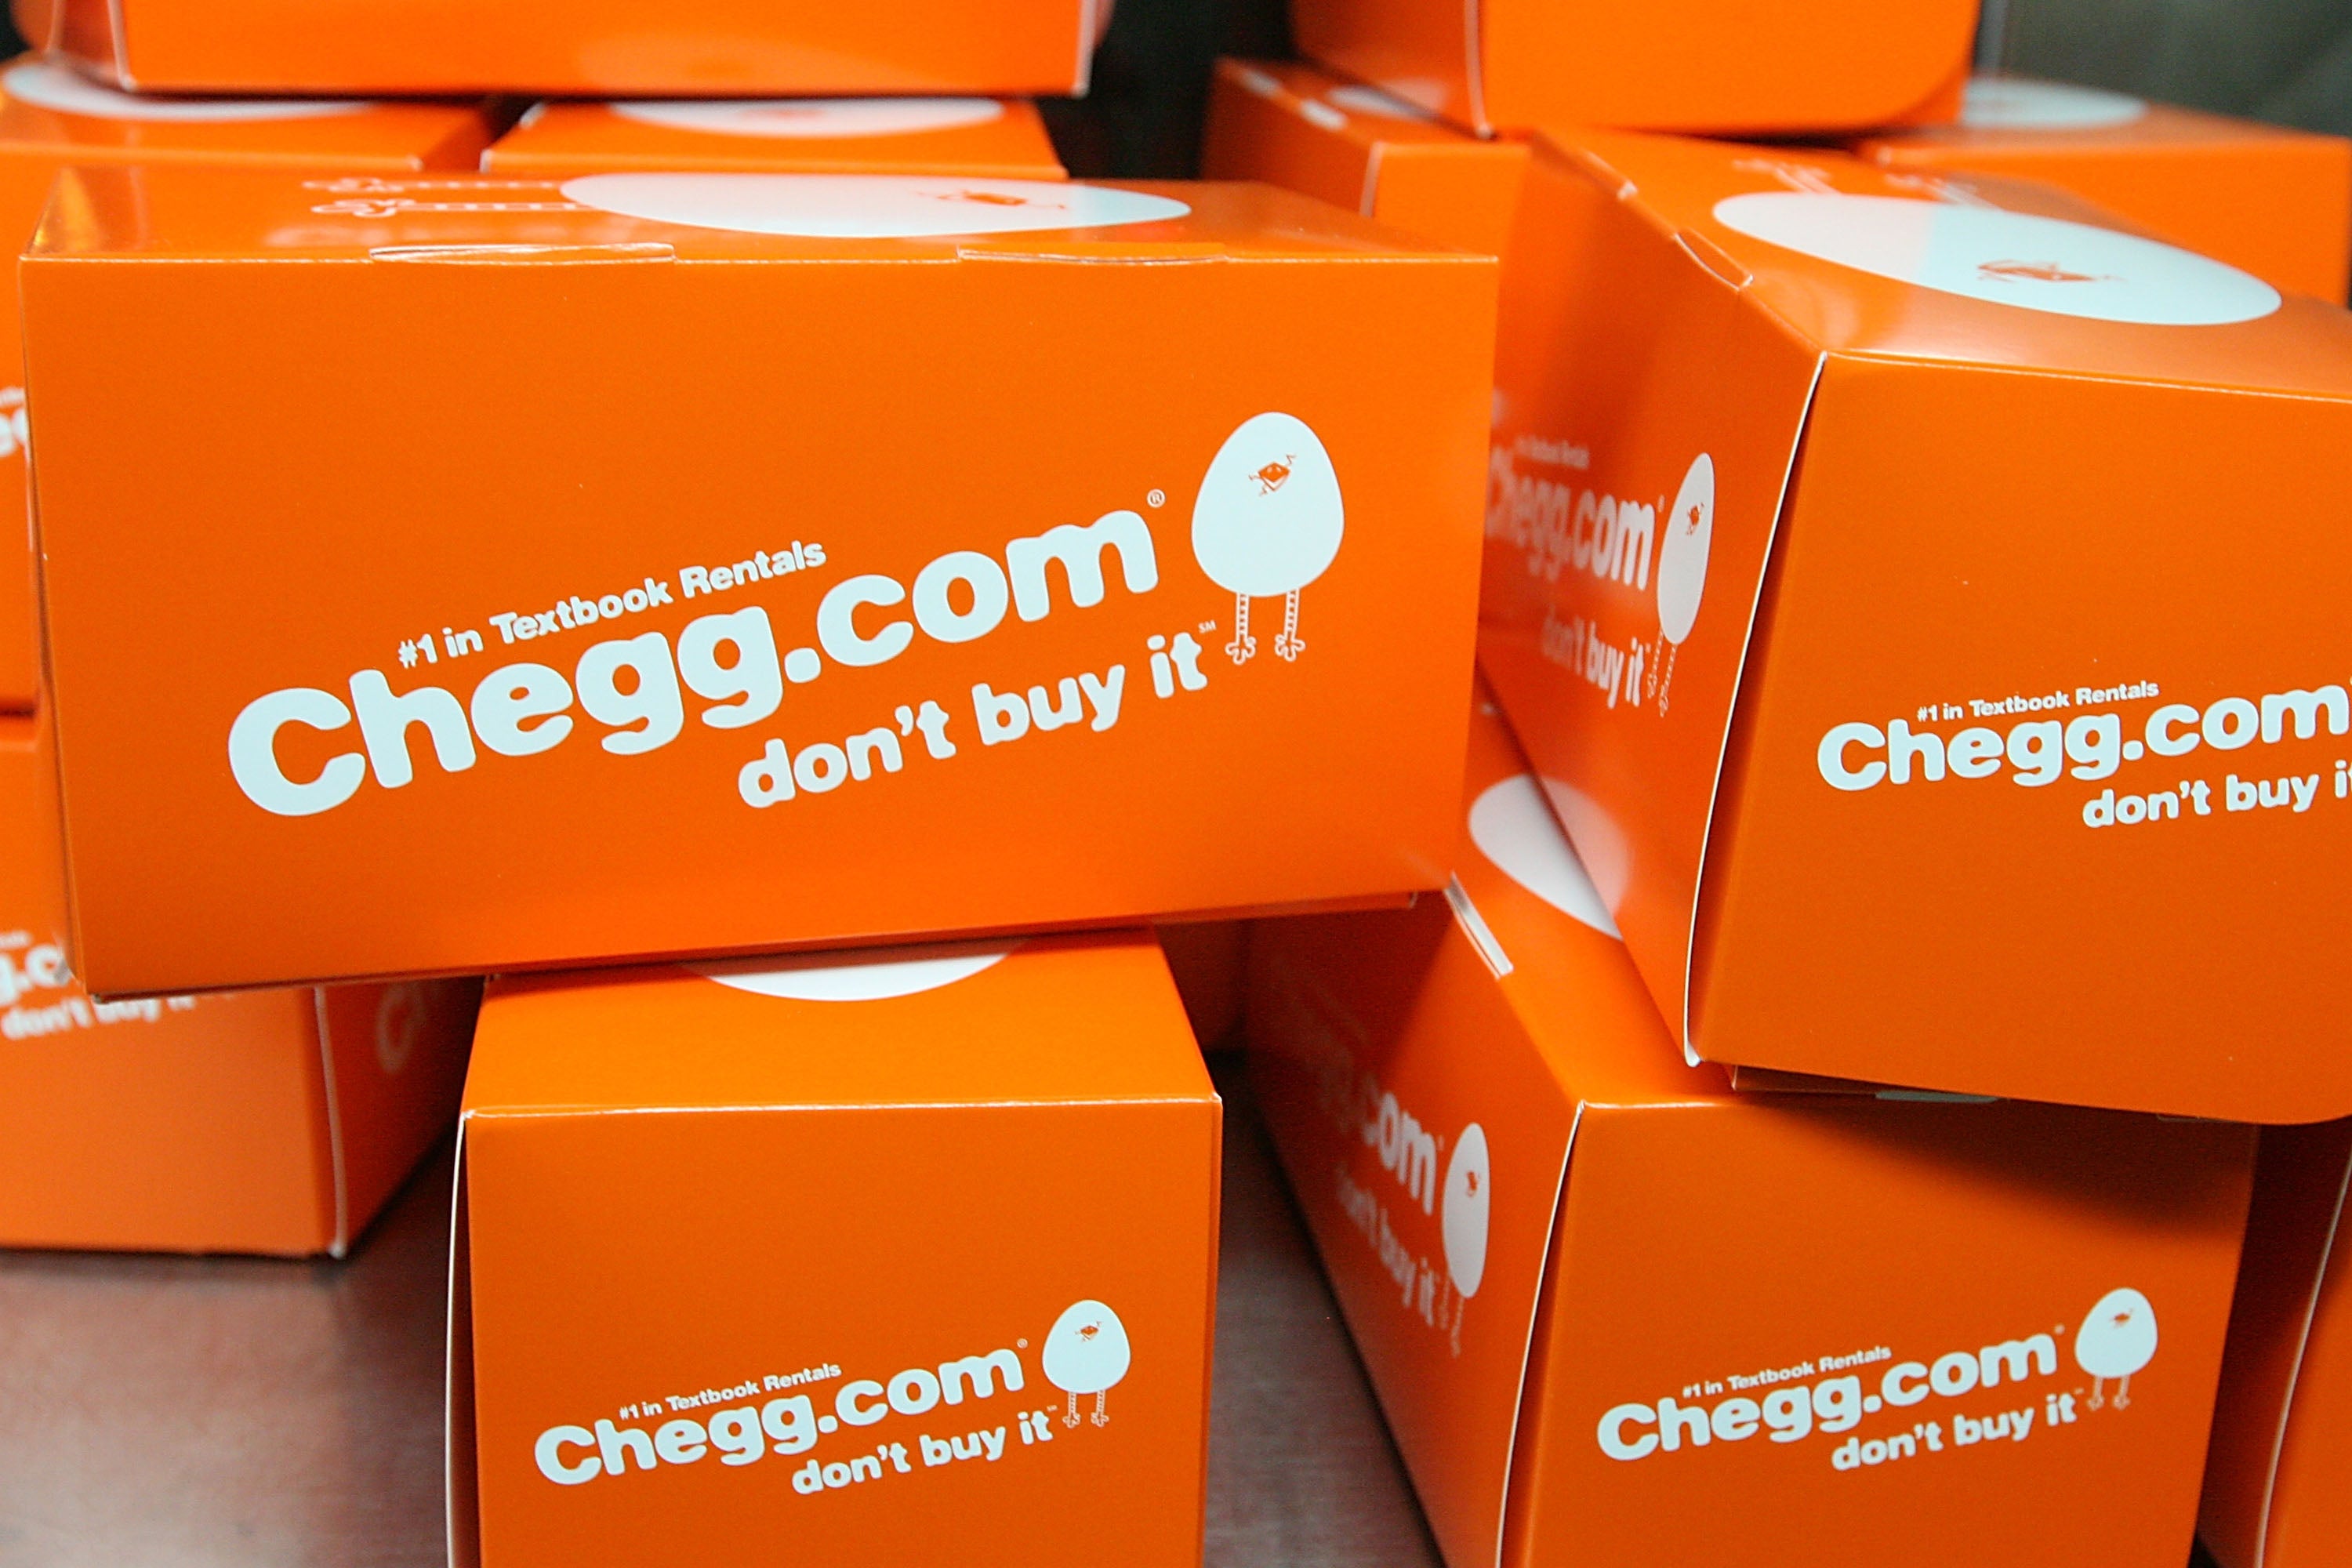 Even textbook rental services like Chegg have not managed to decrease the overall price of textbooks, and they would be completely shut out of any NFT-based market. (Photo: Sarah Kerver, Getty Images)